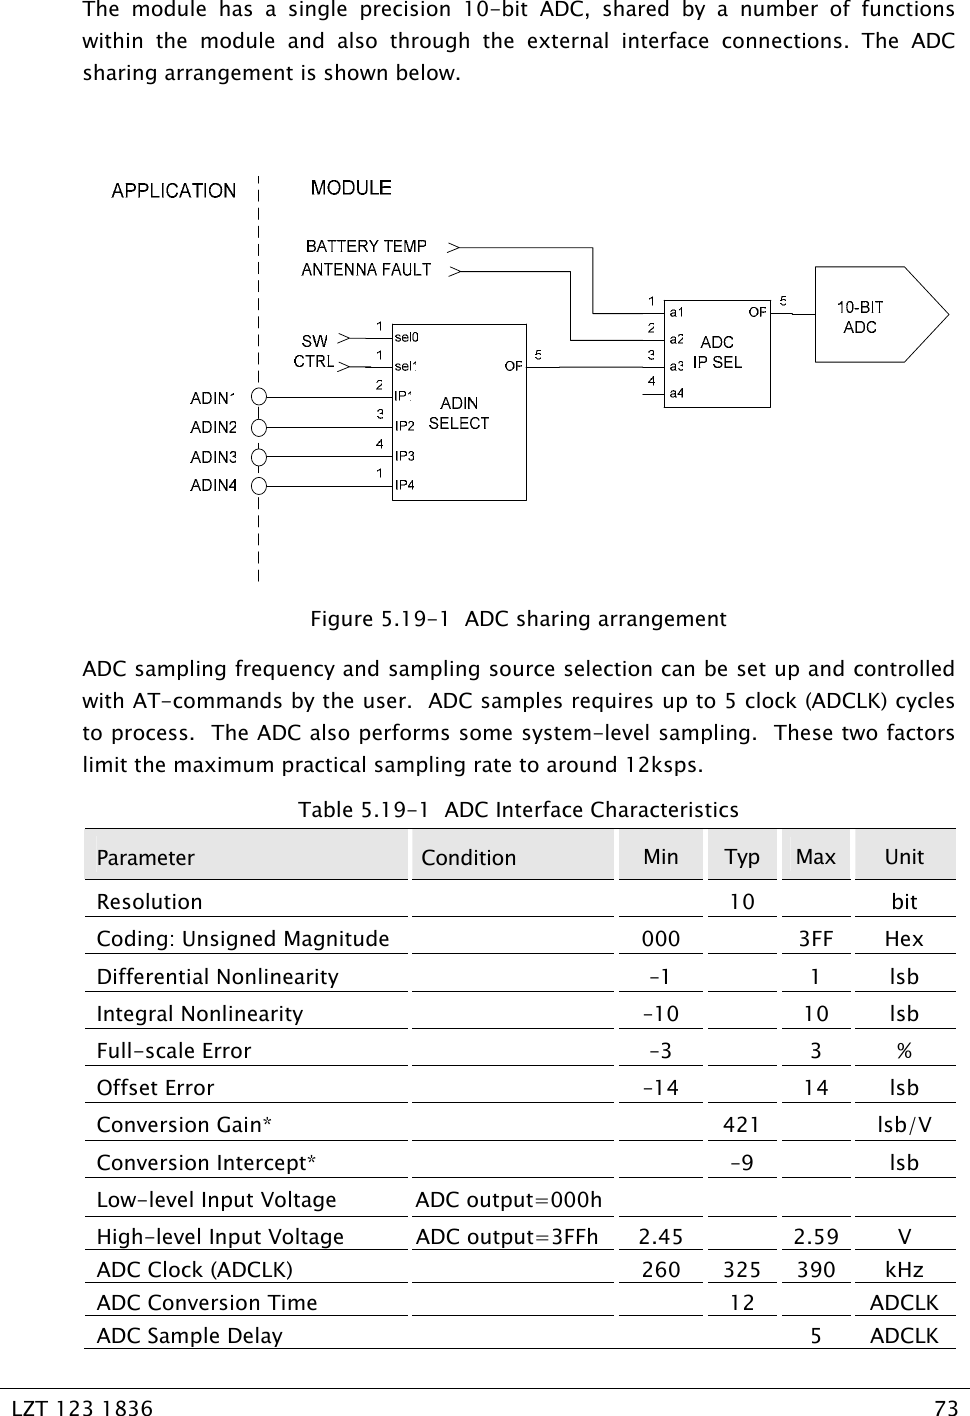   LZT 123 1836  73   The module has a single precision 10-bit ADC, shared by a number of functions within the module and also through the external interface connections. The ADC sharing arrangement is shown below.   Figure 5.19-1  ADC sharing arrangement ADC sampling frequency and sampling source selection can be set up and controlled with AT-commands by the user.  ADC samples requires up to 5 clock (ADCLK) cycles to process.  The ADC also performs some system-level sampling.  These two factors limit the maximum practical sampling rate to around 12ksps. Table 5.19-1  ADC Interface Characteristics Parameter  Condition  Min  Typ  Max  Unit Resolution    10  bit Coding: Unsigned Magnitude    000    3FF  Hex Differential Nonlinearity    –1    1  lsb Integral Nonlinearity    –10    10  lsb Full-scale Error    –3    3  % Offset Error    –14    14  lsb Conversion Gain*      421    lsb/V Conversion Intercept*      –9    lsb Low-level Input Voltage  ADC output=000h        High-level Input Voltage  ADC output=3FFh  2.45    2.59  V ADC Clock (ADCLK)    260  325  390  kHz ADC Conversion Time      12    ADCLK ADC Sample Delay        5  ADCLK 